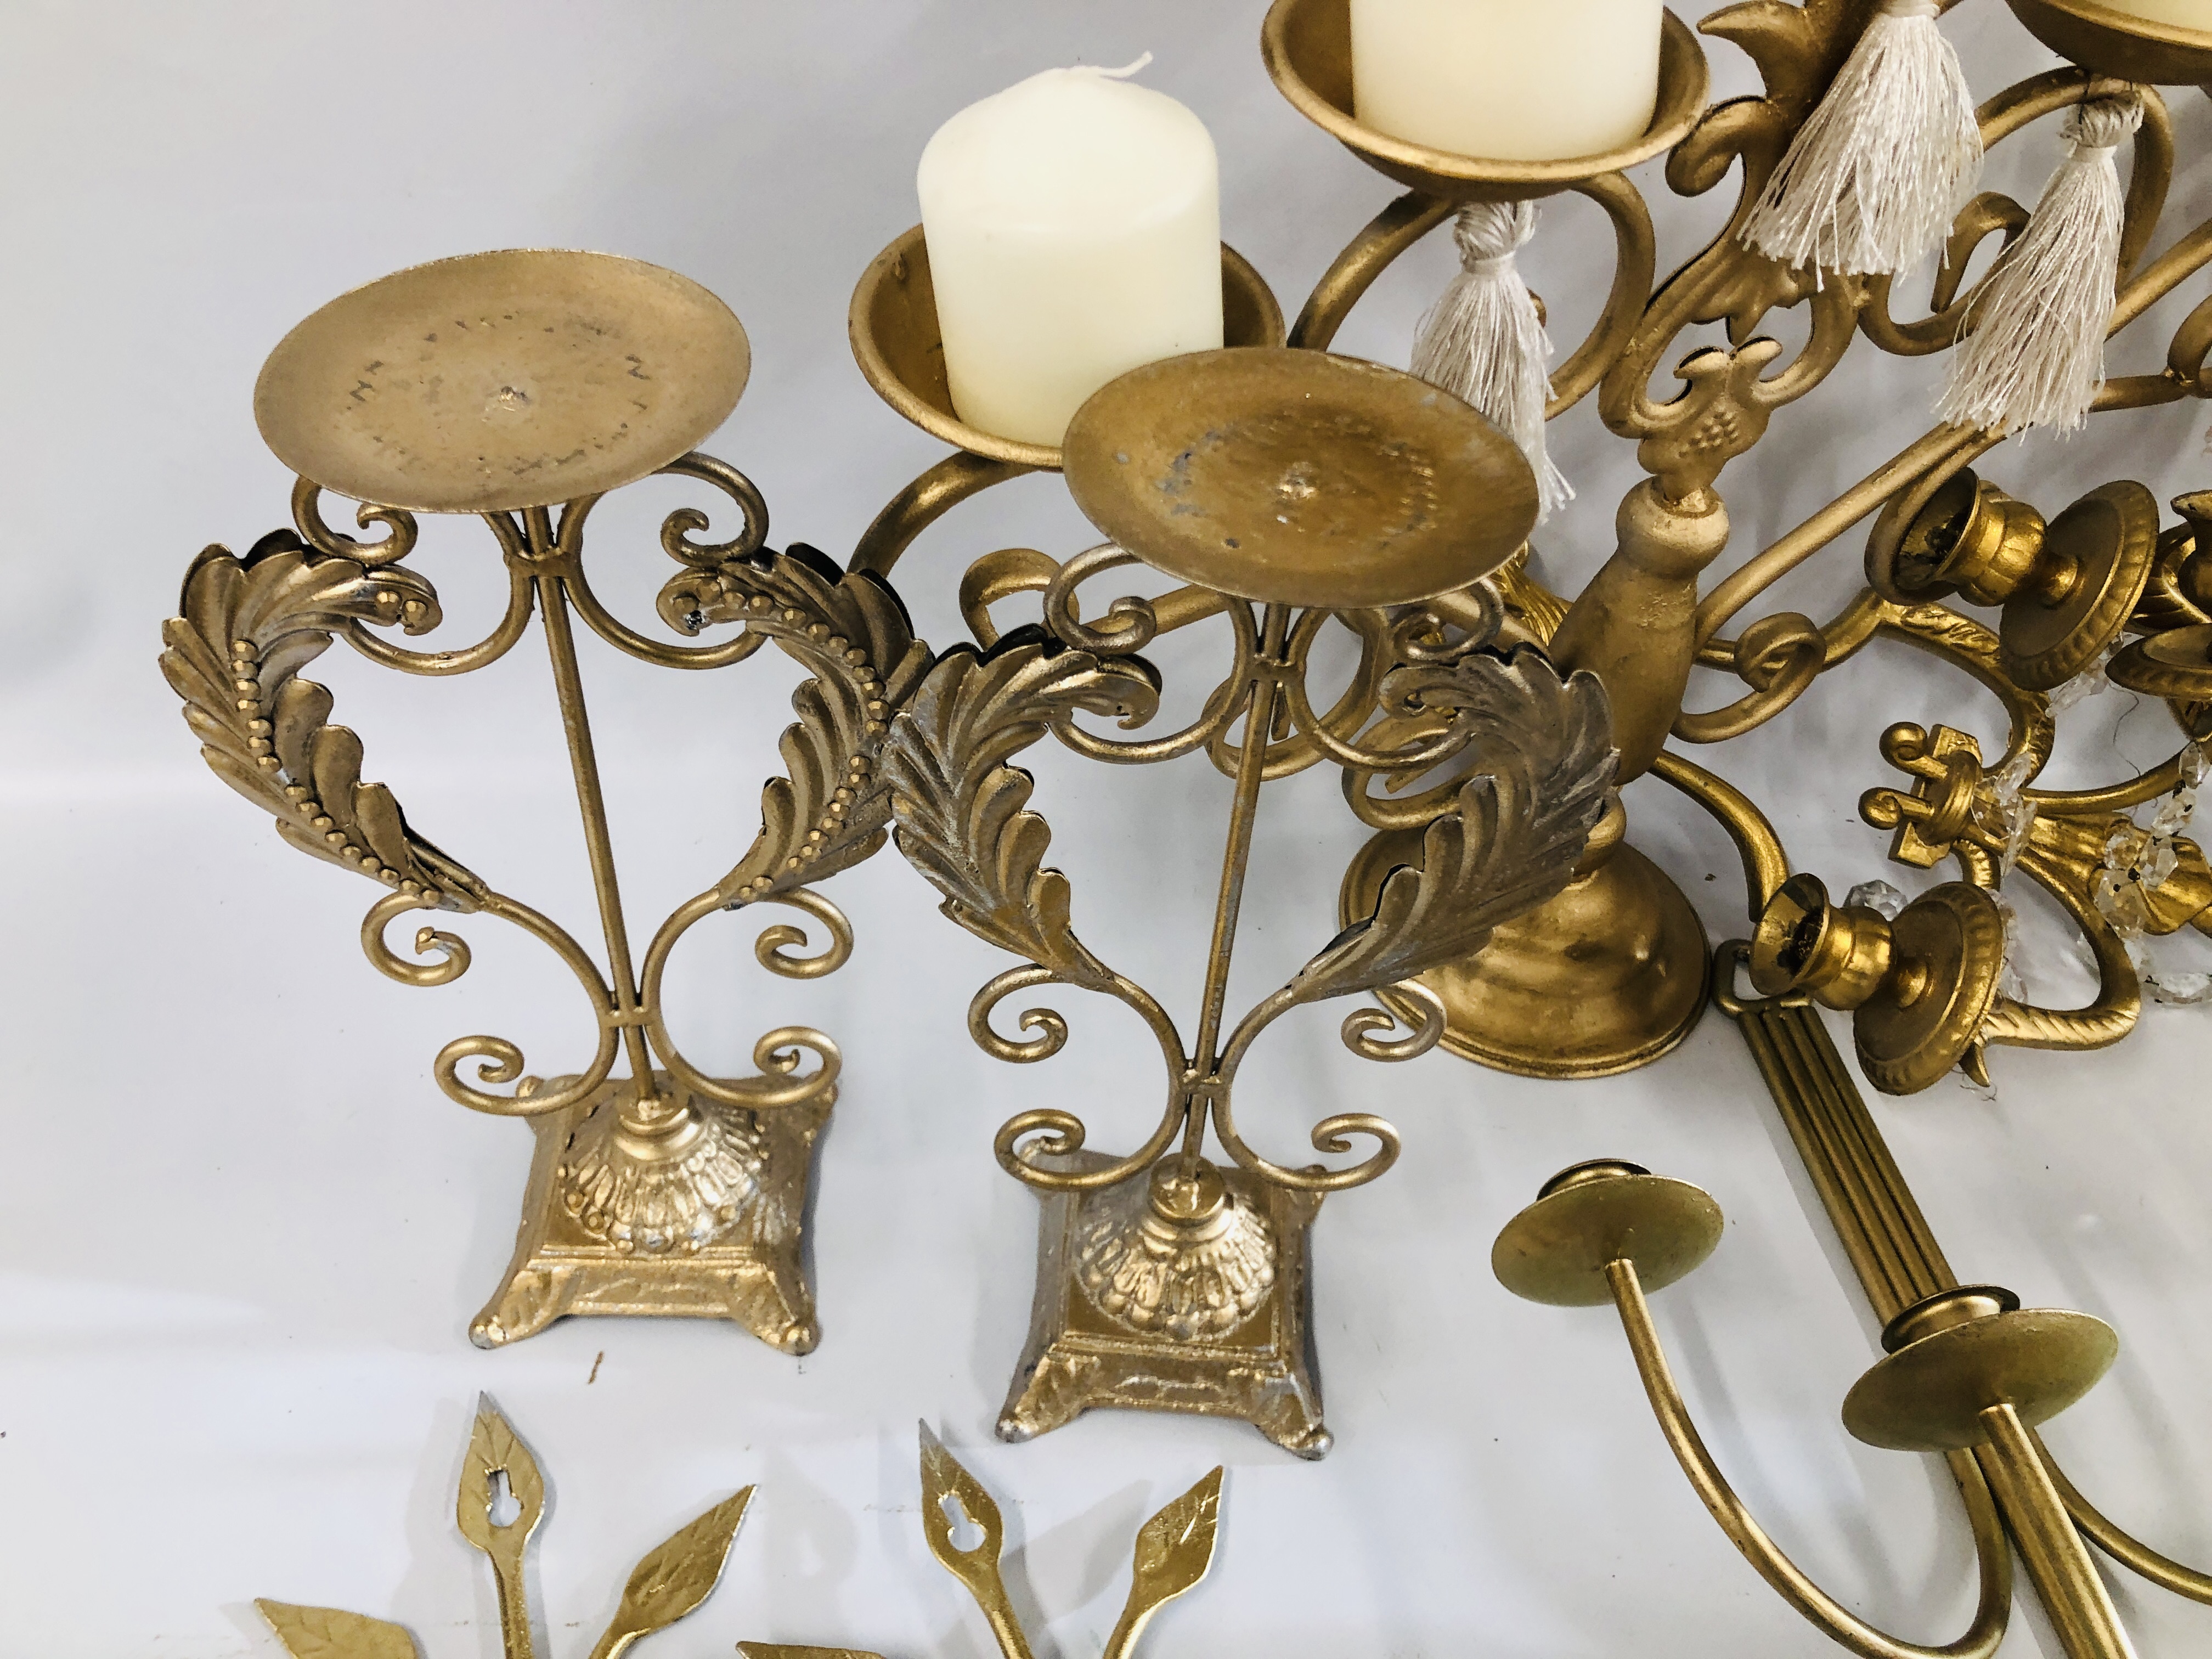 LARGE BOX OF ASSORTED MODERN SHABBY CHIC METAL CRAFT CANDLE STICKS, STANDS AND WALL SCONCES, ETC. - Image 3 of 8